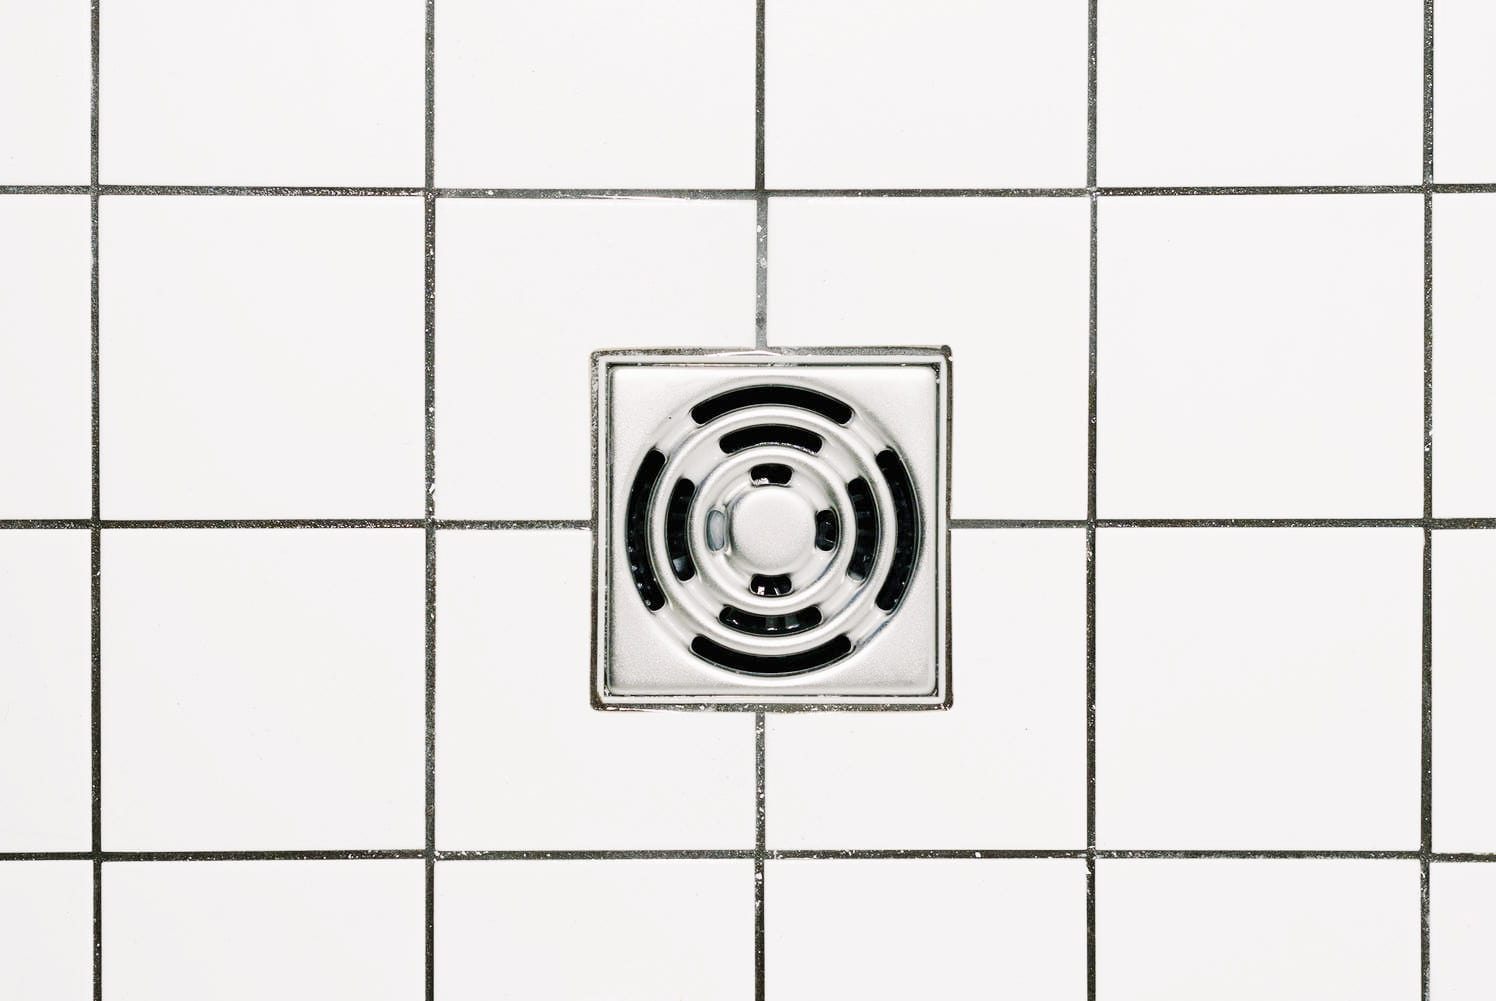 Shower tray made of tiles, with drain and drain below